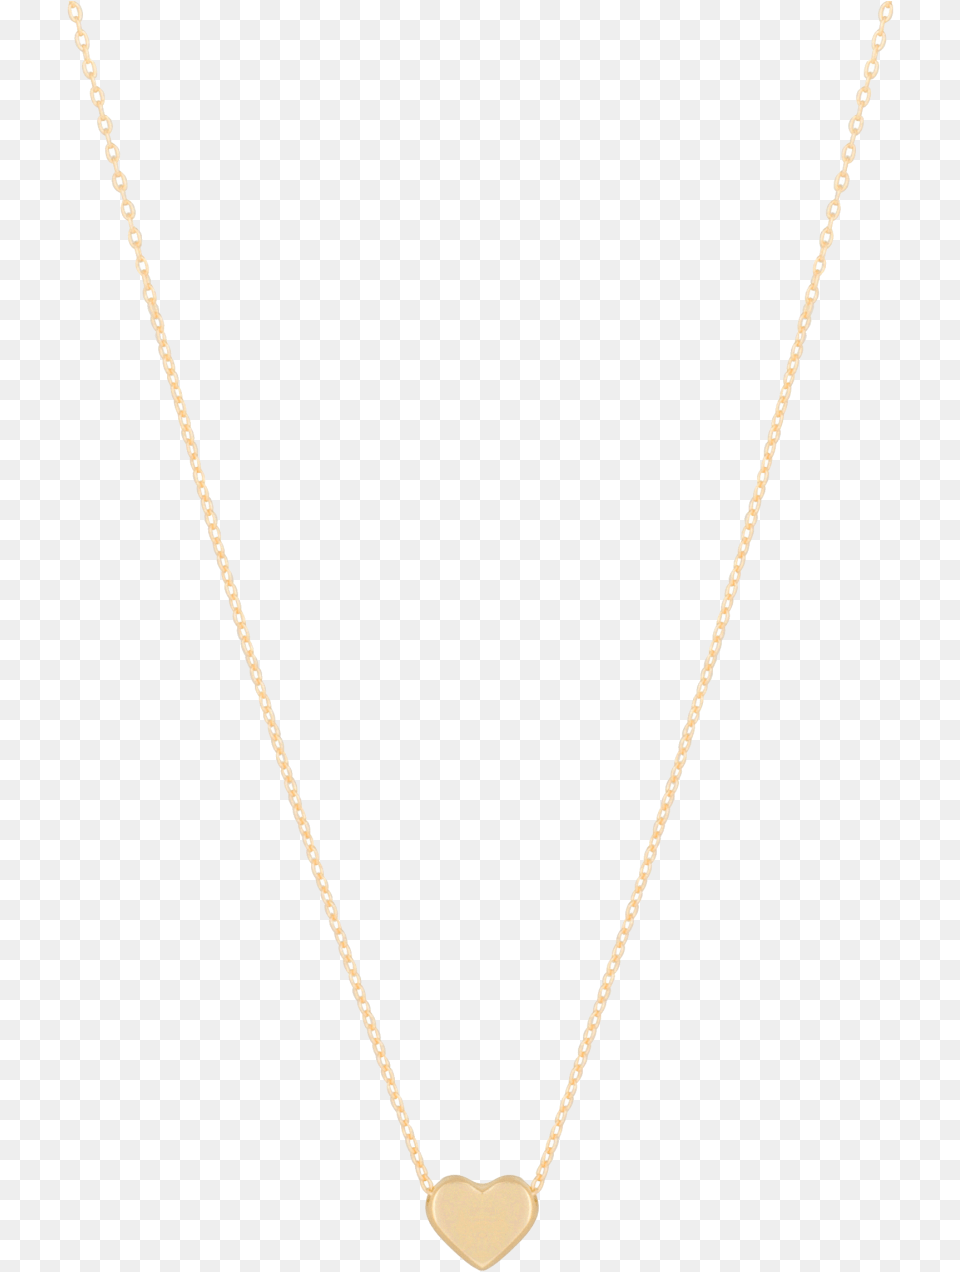 Categories Lott Ketting Goud Hartje, Accessories, Jewelry, Necklace, Diamond Free Png Download